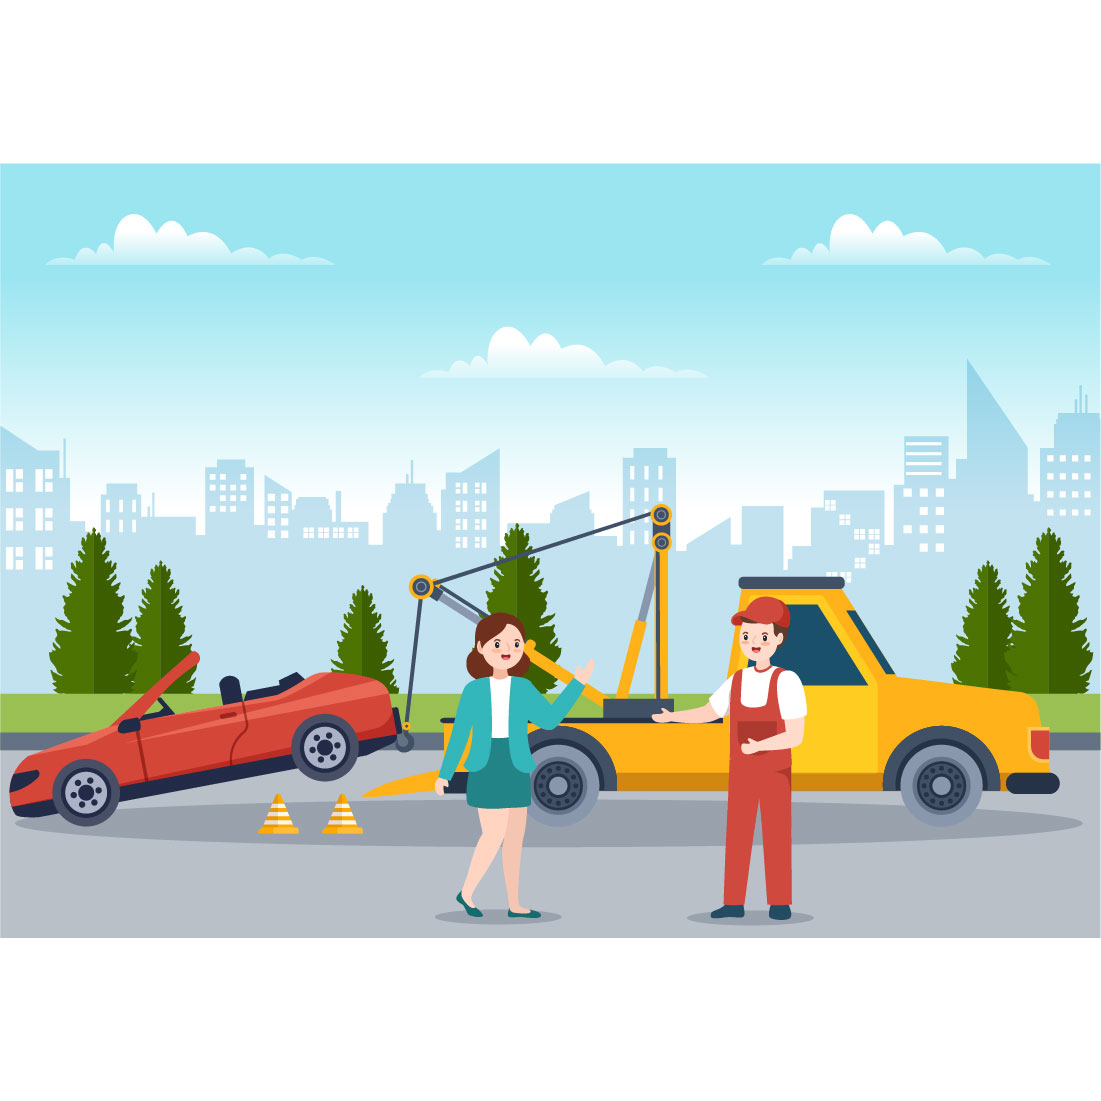 Auto Towing Car Illustration Design cover image.